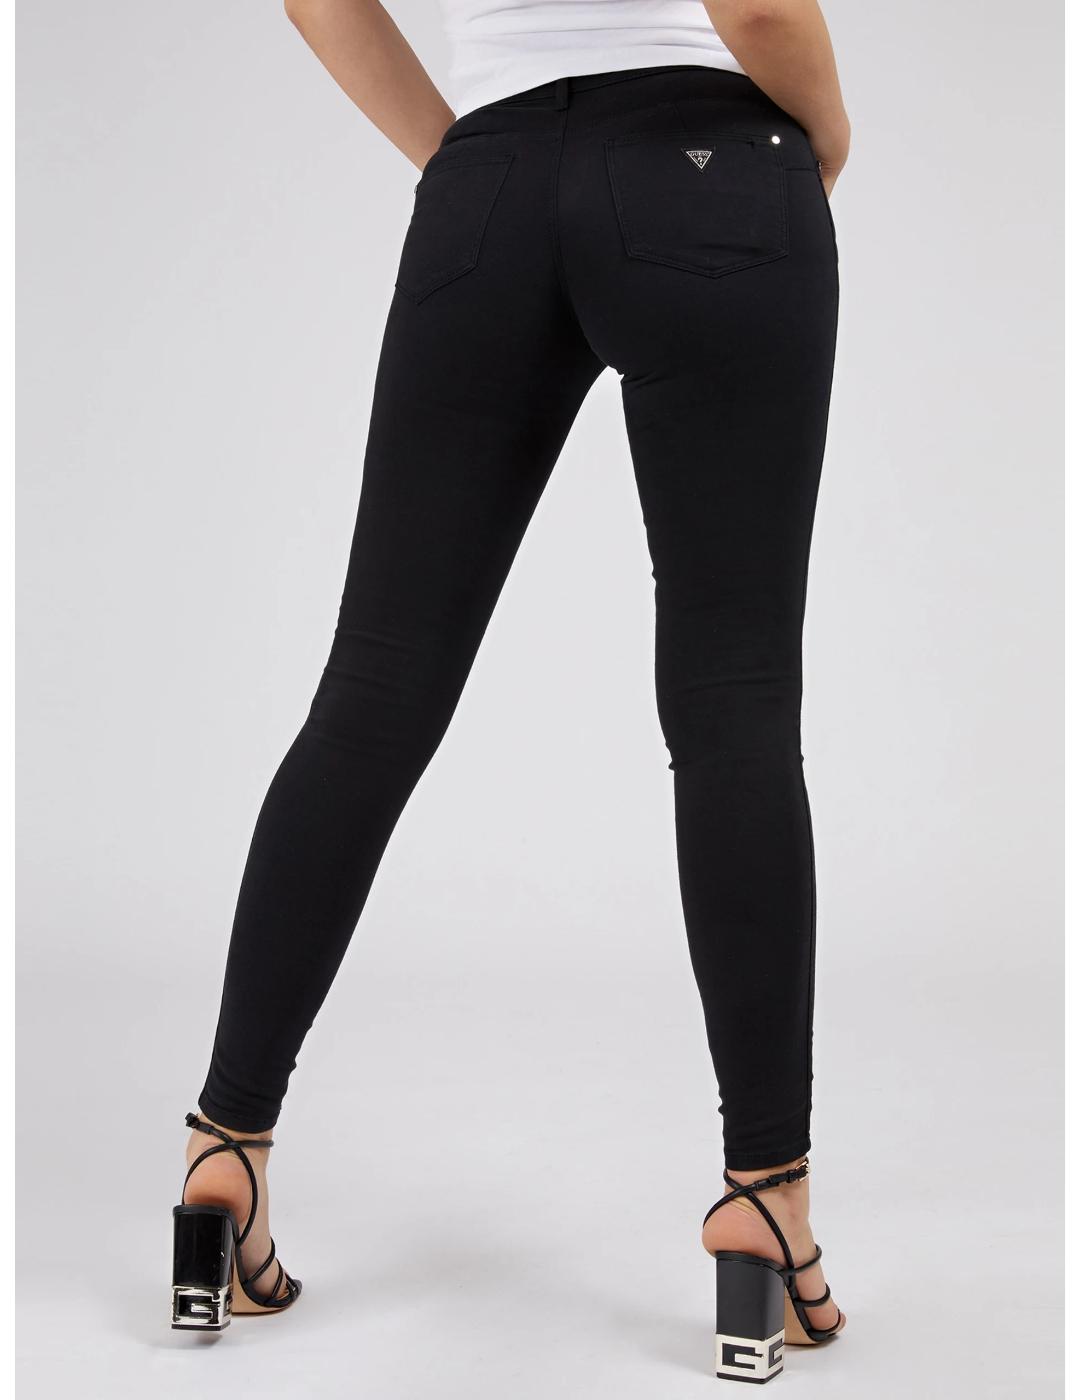 Jeans Guess curve negro para mujer